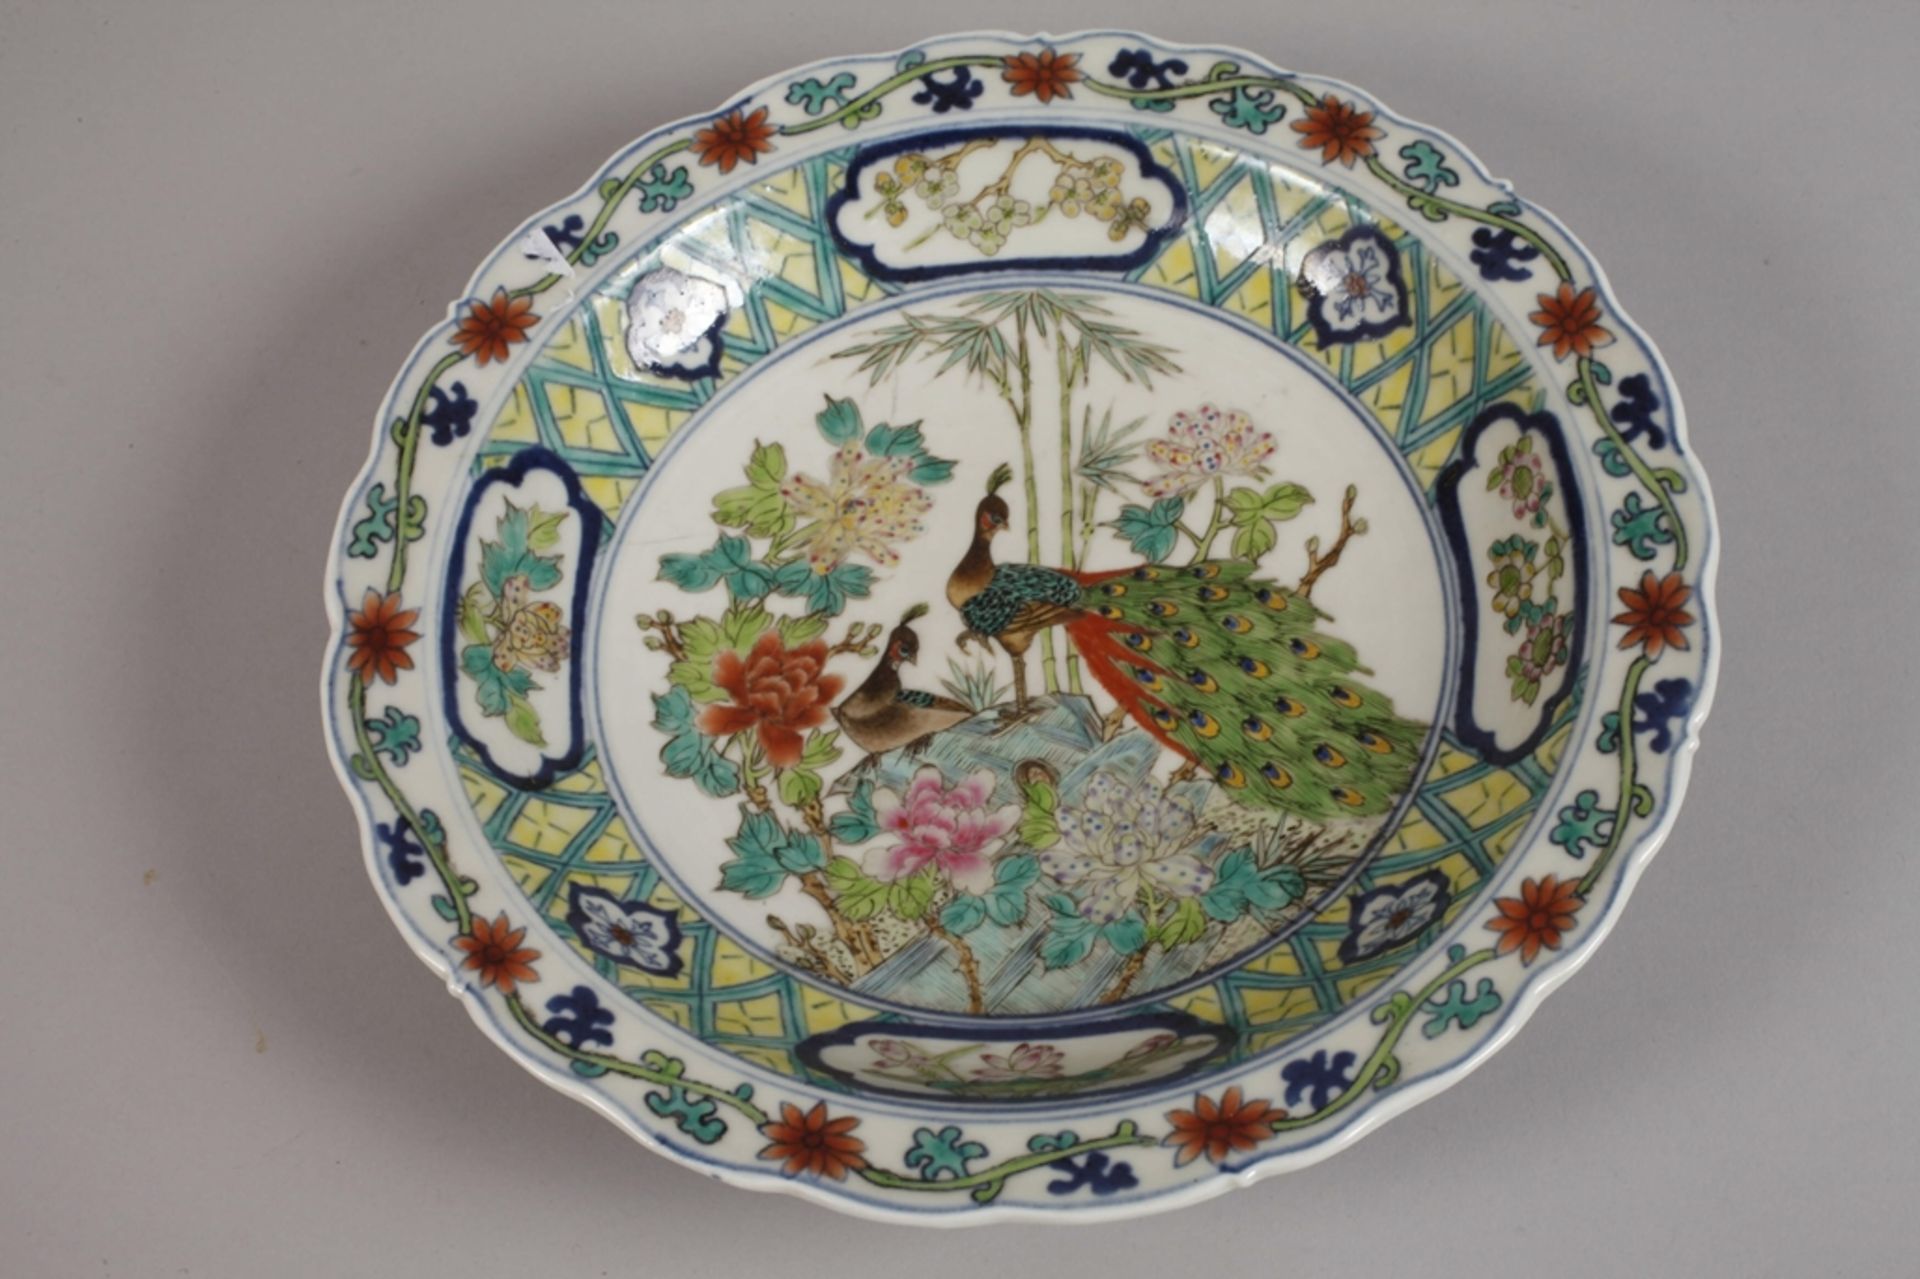 Decorative plate - Image 2 of 5